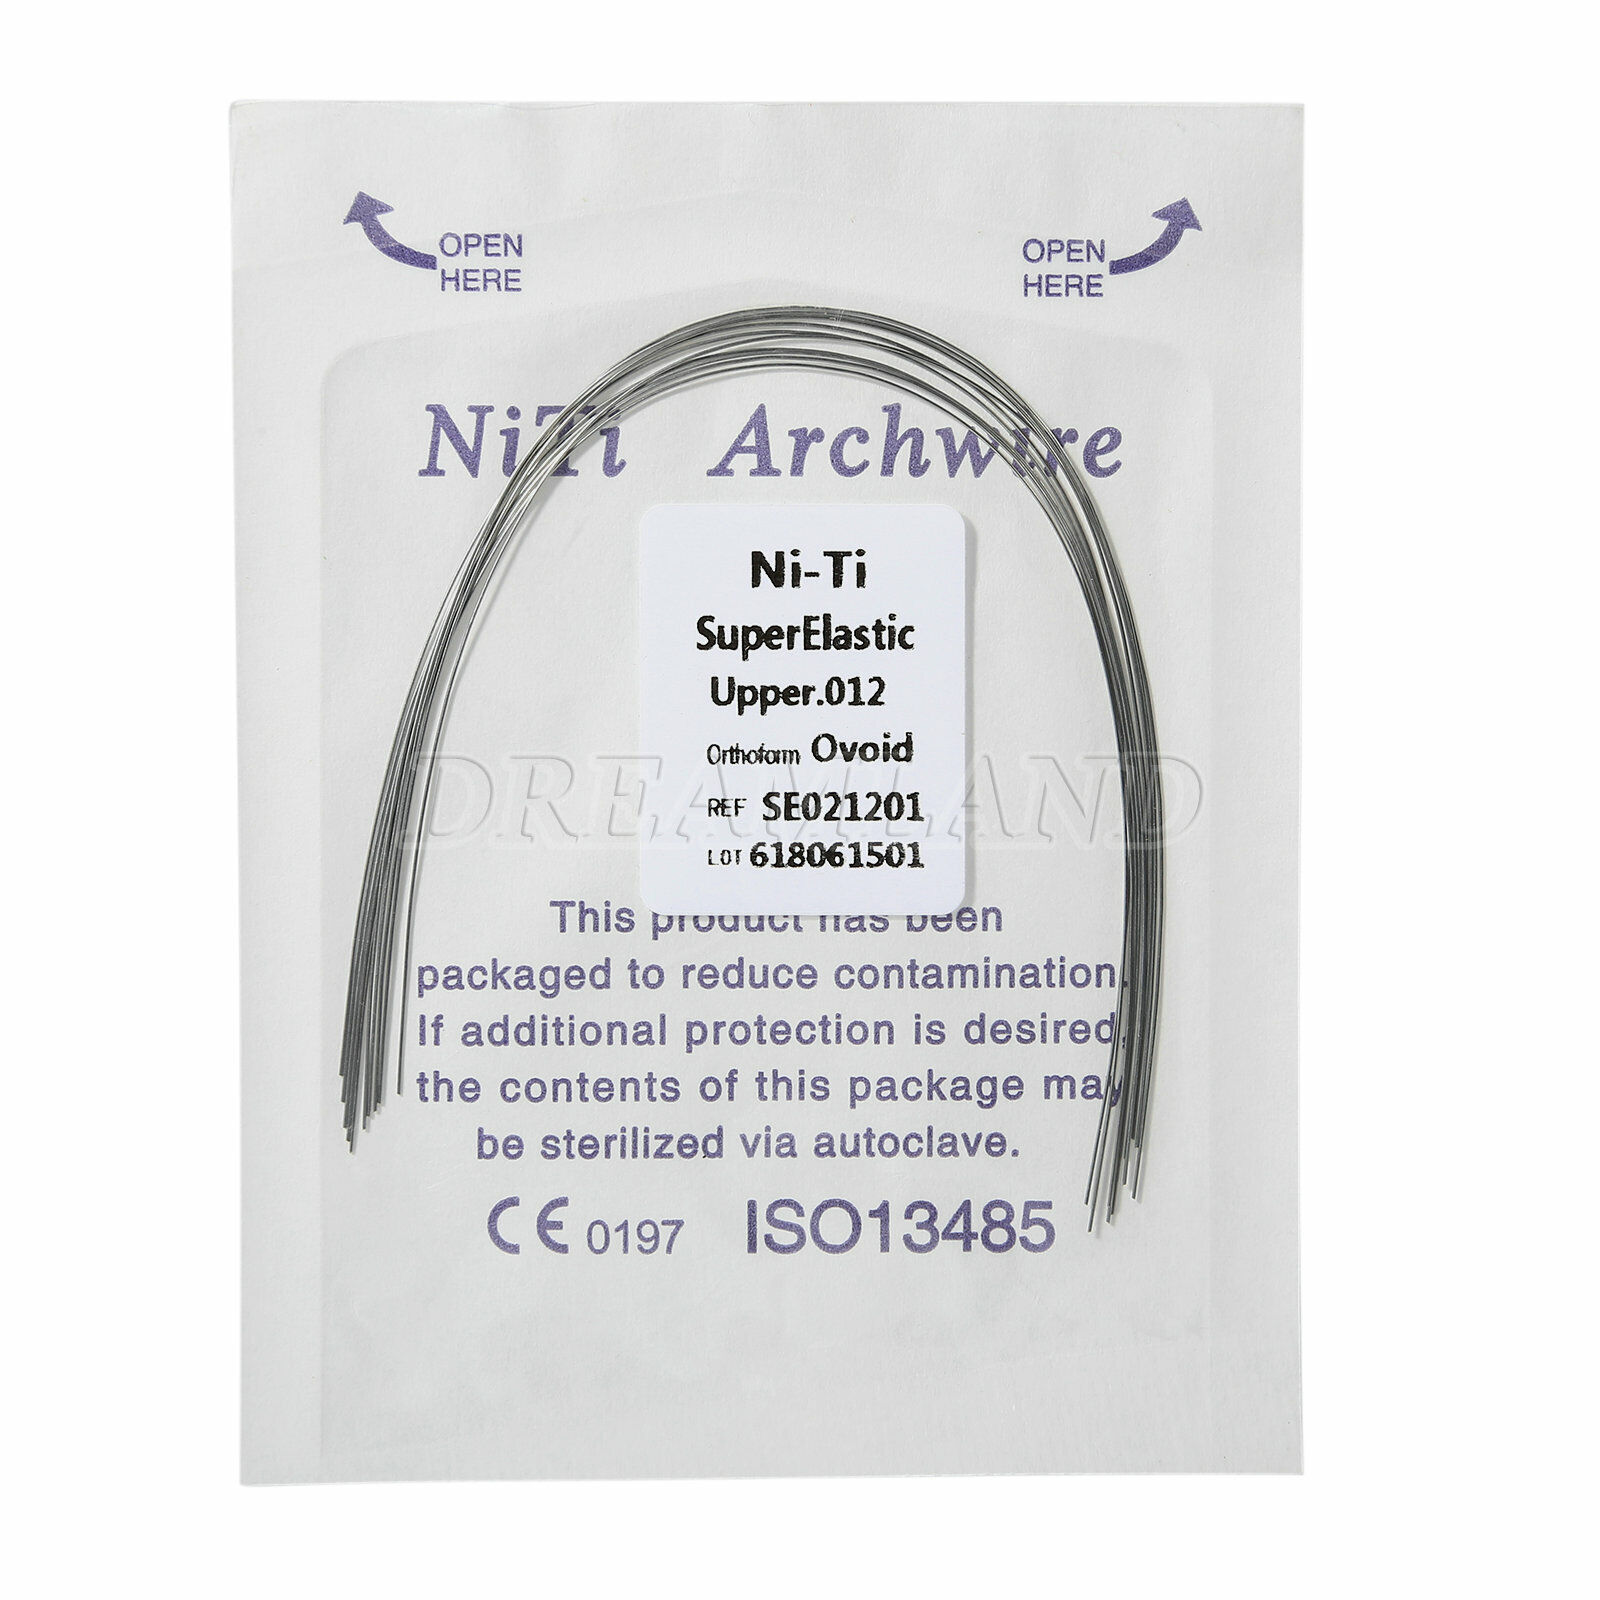 10pcs/pack Dental Orthodontic Super Elastic Niti Arch Wire Round Ovoid Form